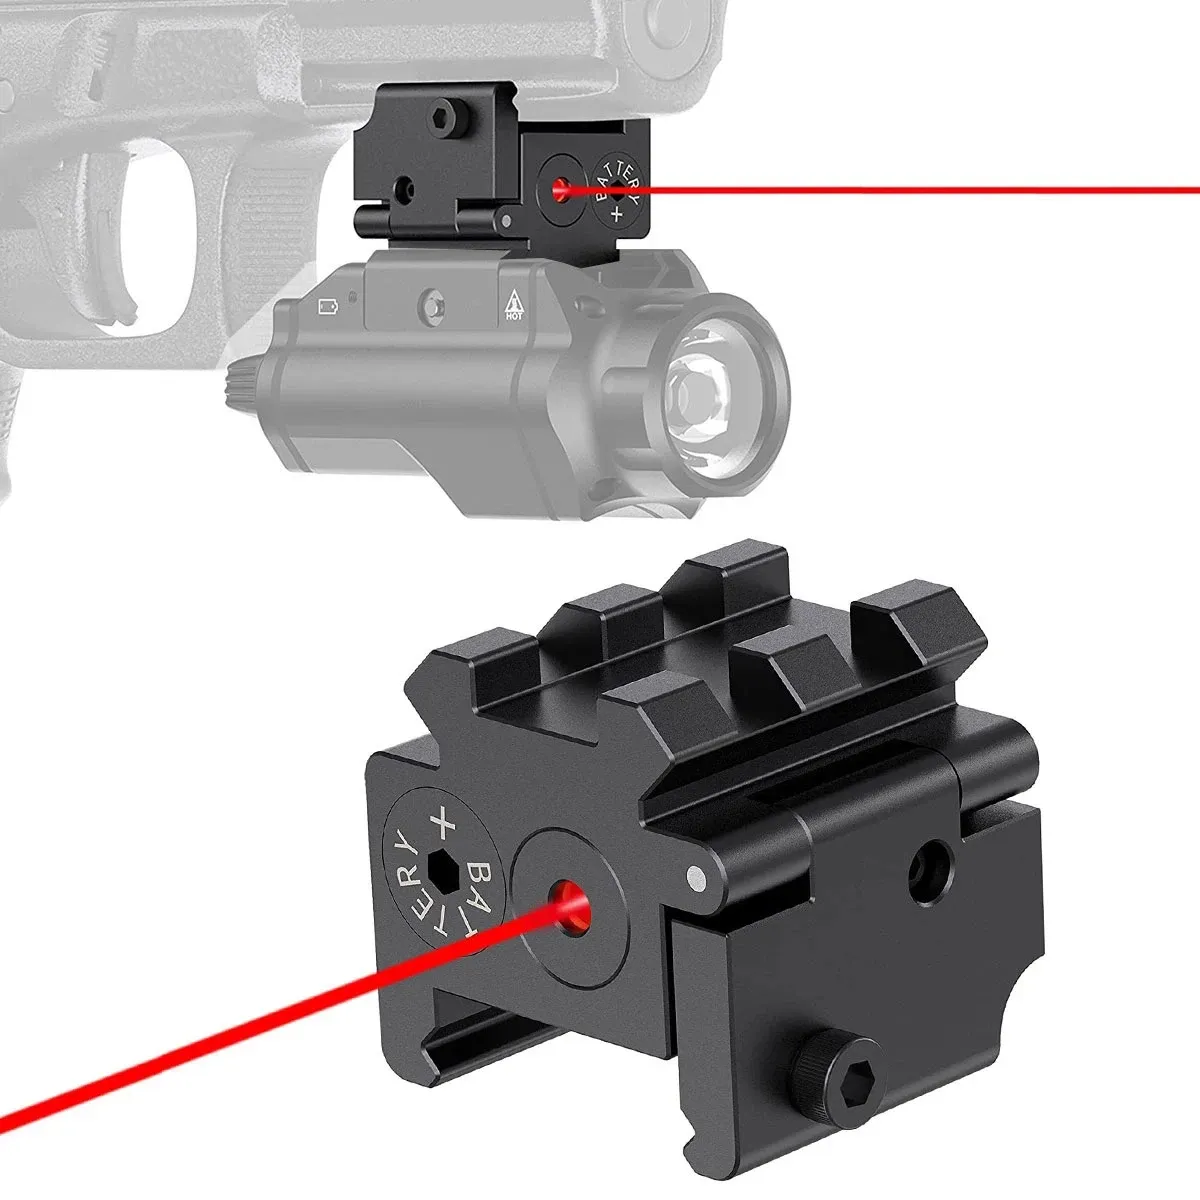 SCOPES MINI 20 mm Red Dot Laser Sight Scope Mount Set för pistol Pistol Rifle Airsoftscope Hunting Accessories